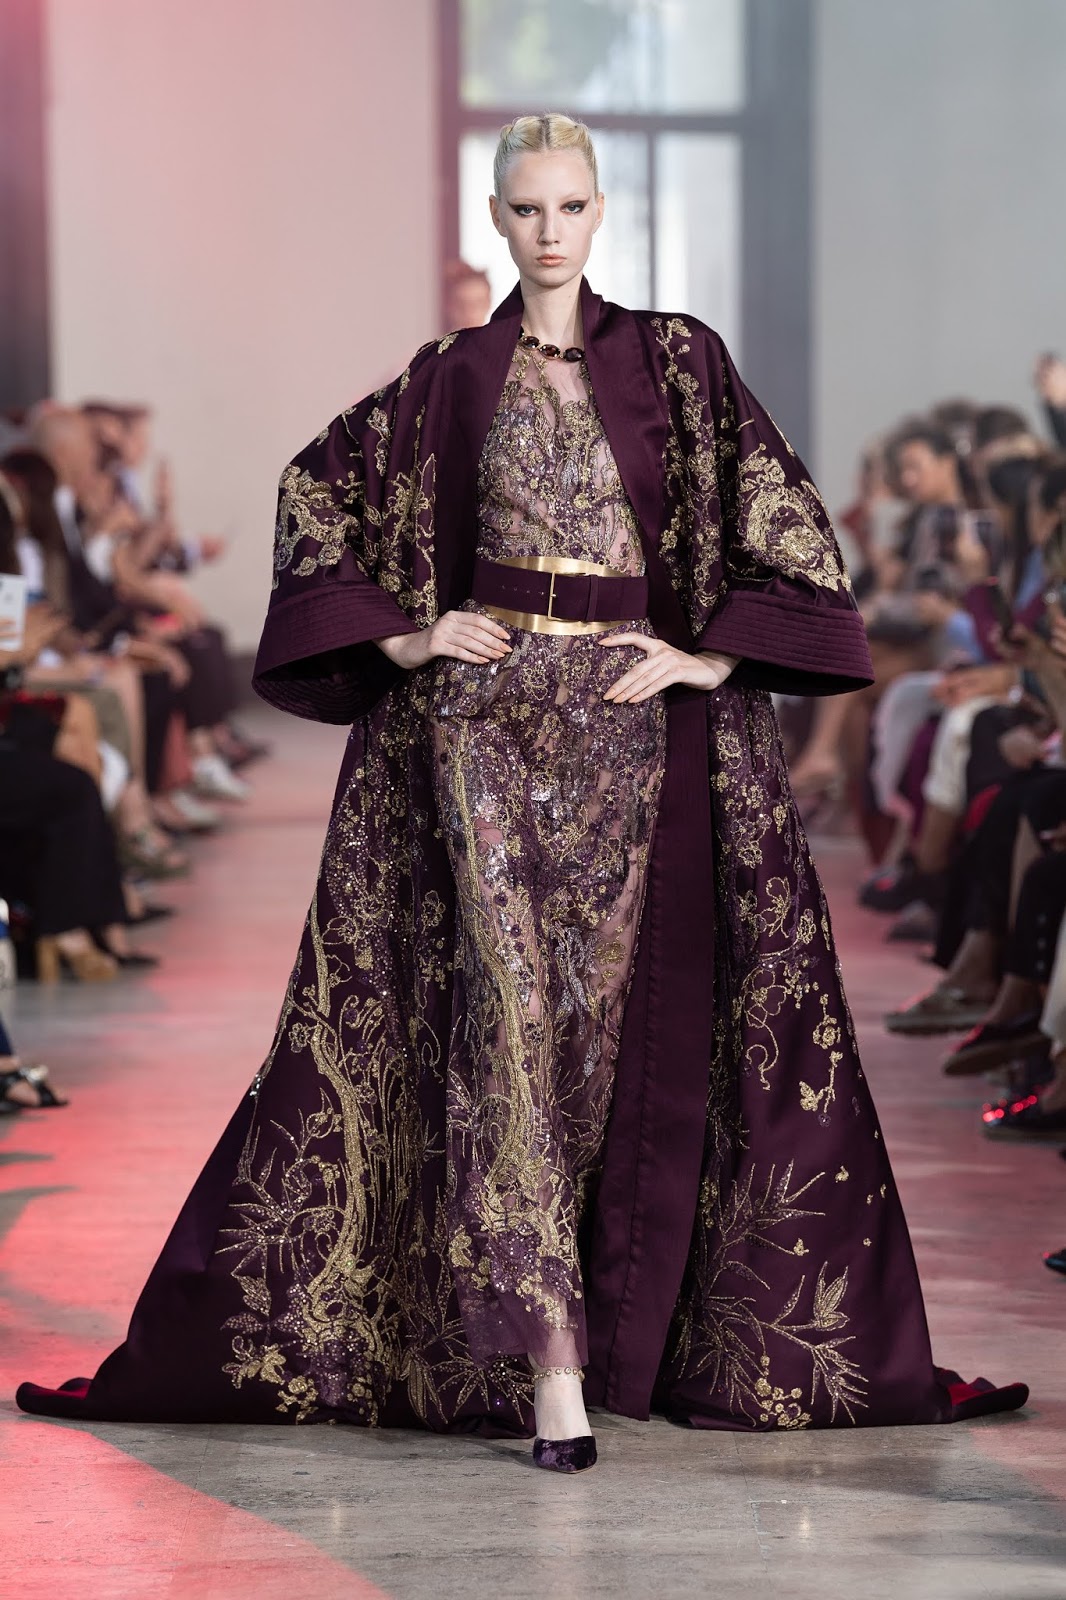 Couture Gorgeous: ELIE SAAB July 11, 2019 | ZsaZsa Bellagio - Like No Other